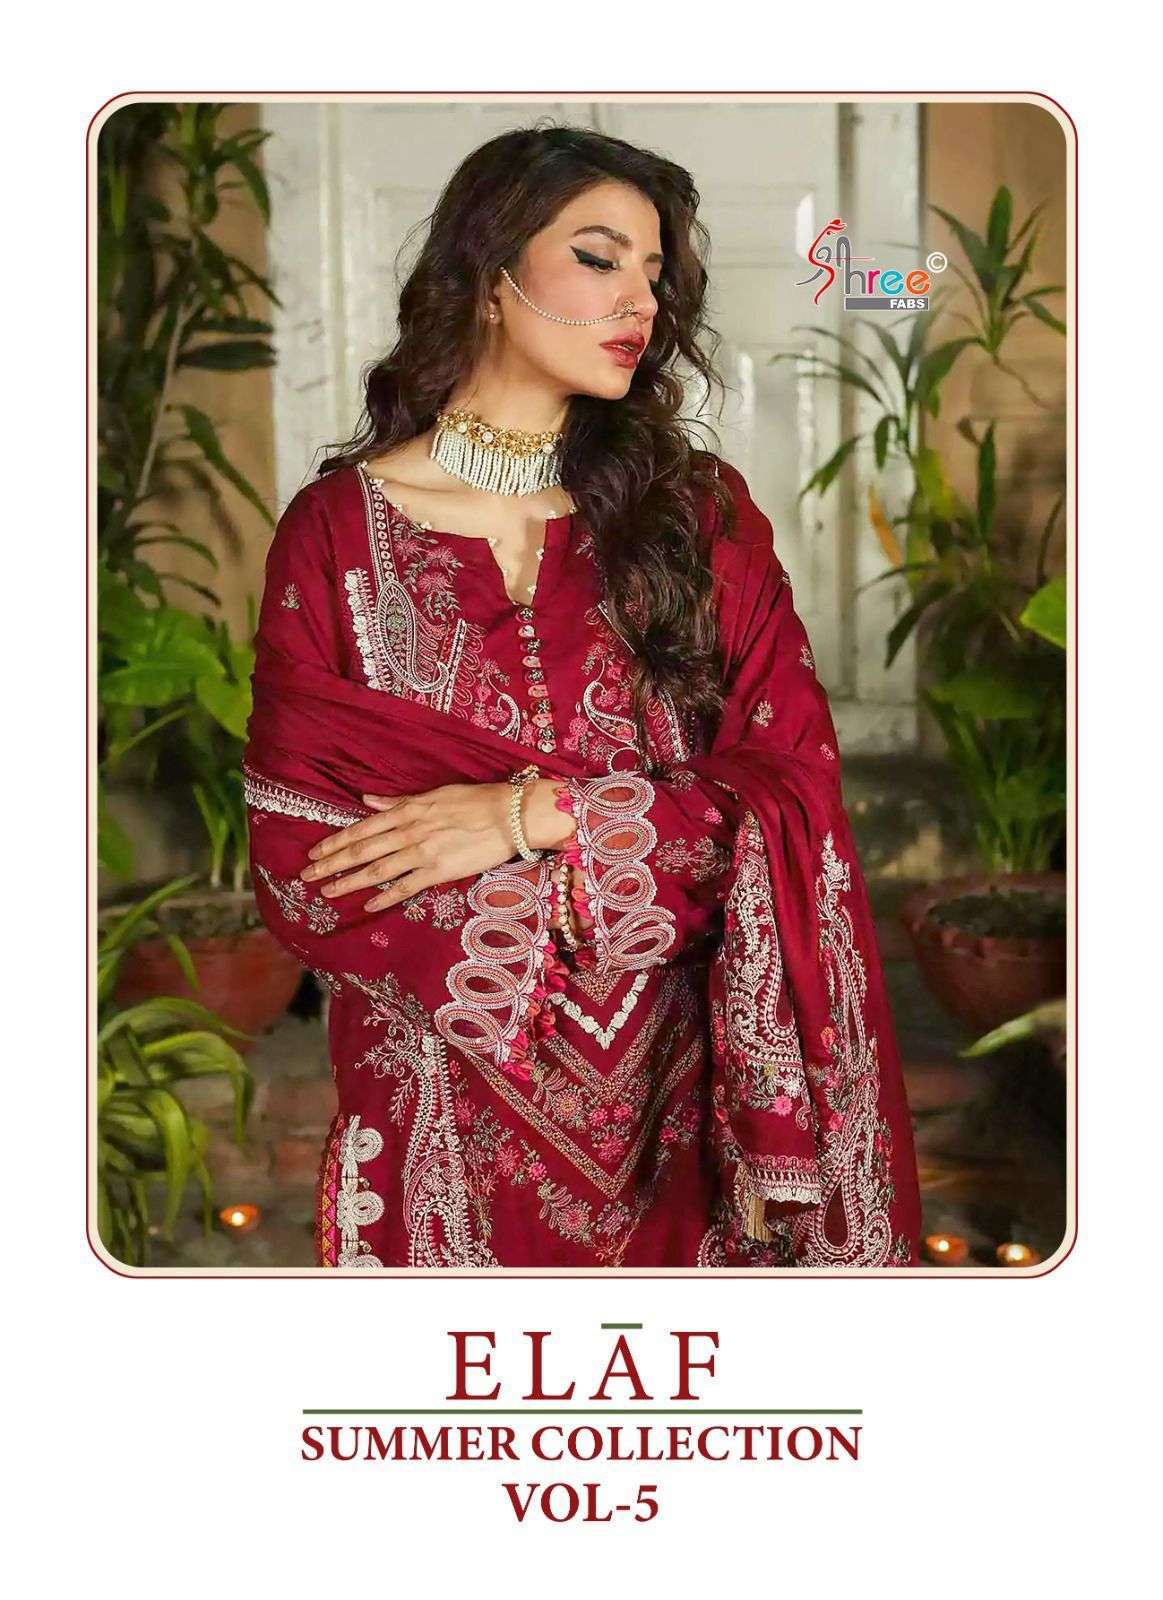 SHREE FABS ELAF SUMMER COLLECTION VOL 5 COTTON WITH EMBROIDE...